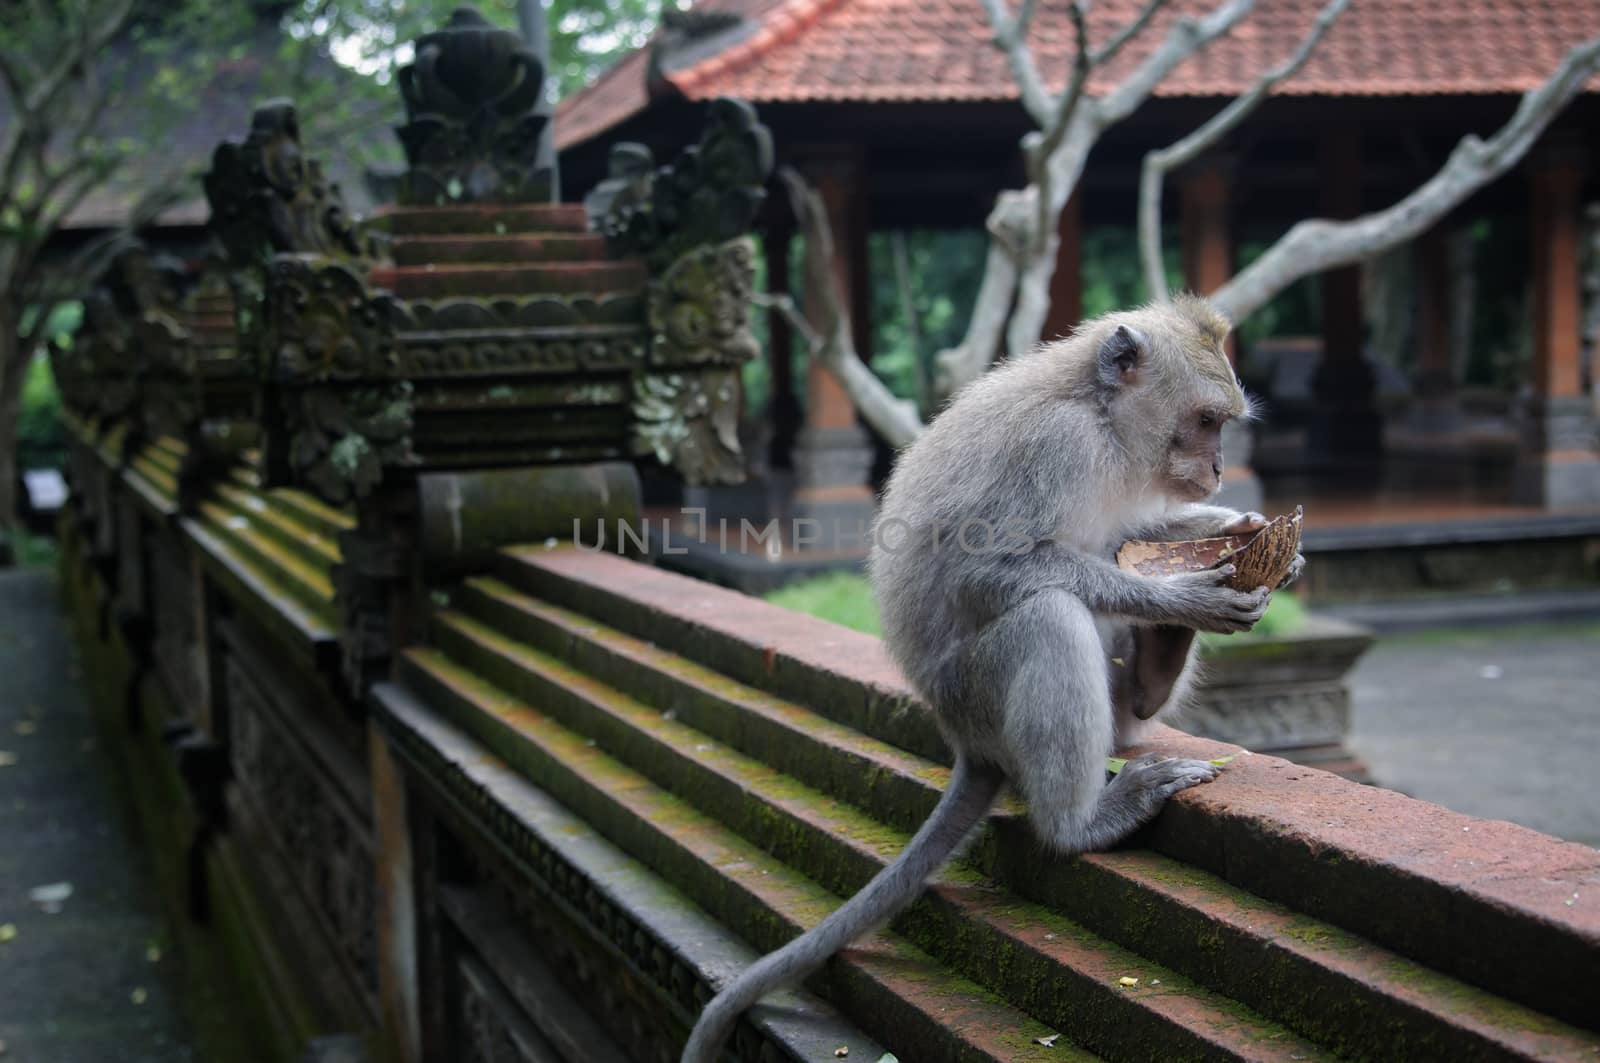 Padangtegal Monkey Forest, famous touristic place in Ubud, Bali Indonesia by johnnychaos